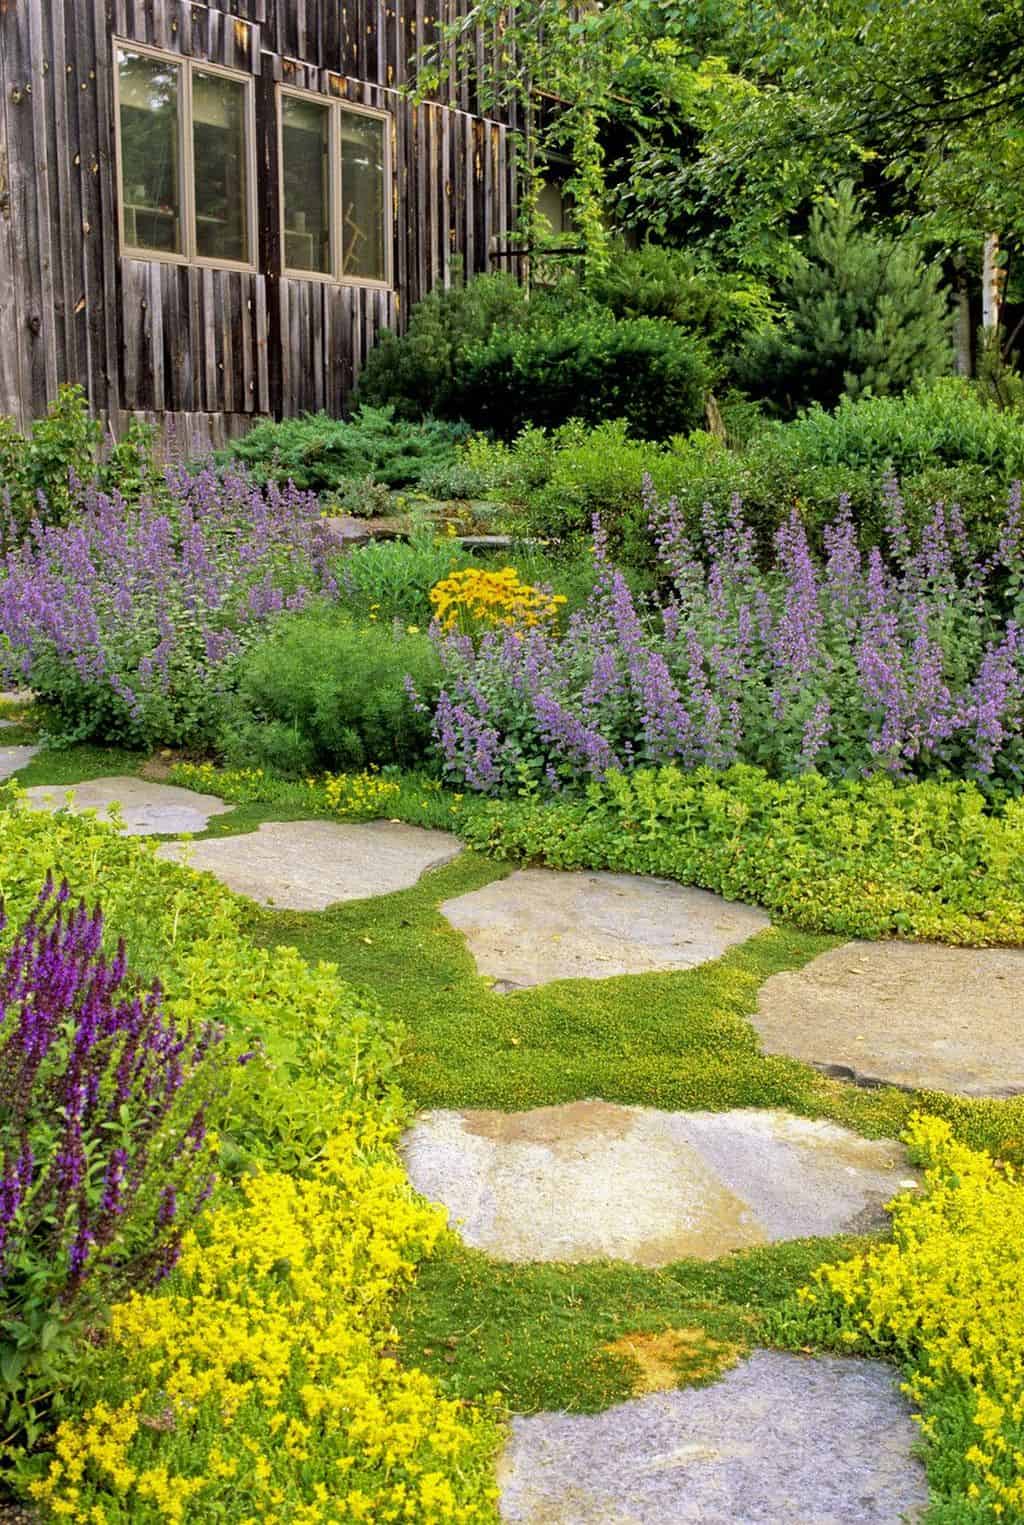 garden walkway with stones for the steps and there are grasses in between each stones   #walkway #Hardscaping #backyardLandscaping #backyardLandscapingIdeas #landscaping #cheapLandscapingIdeas #backyard #landscaping #curbAppeal  #steppingStones #flowers